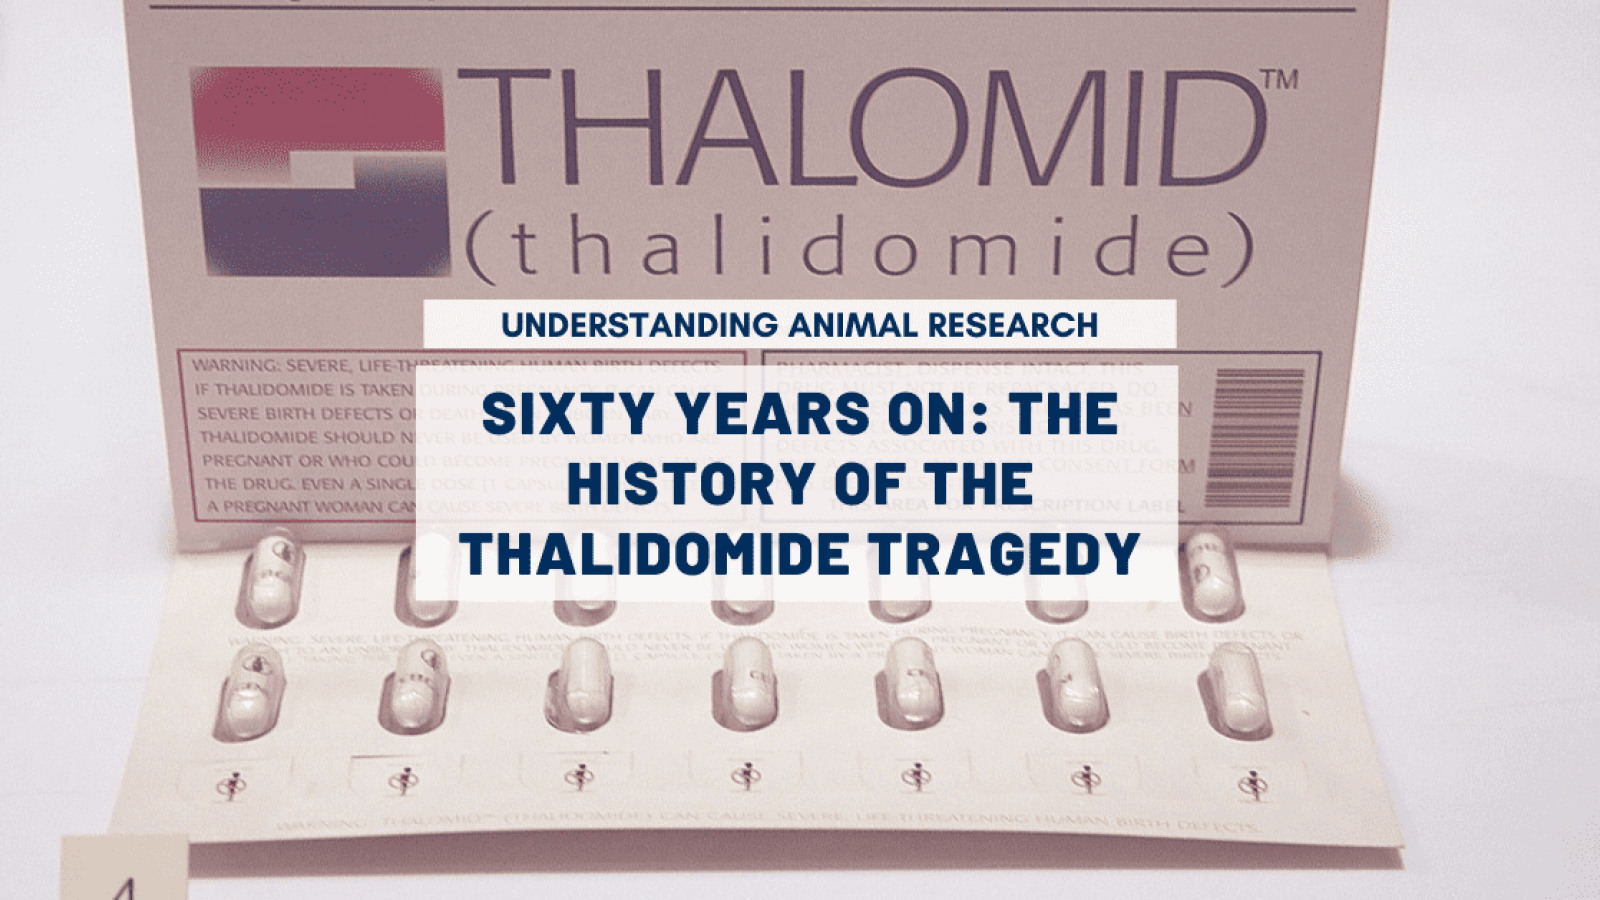 Sixty years on: the history of the thalidomide tragedy